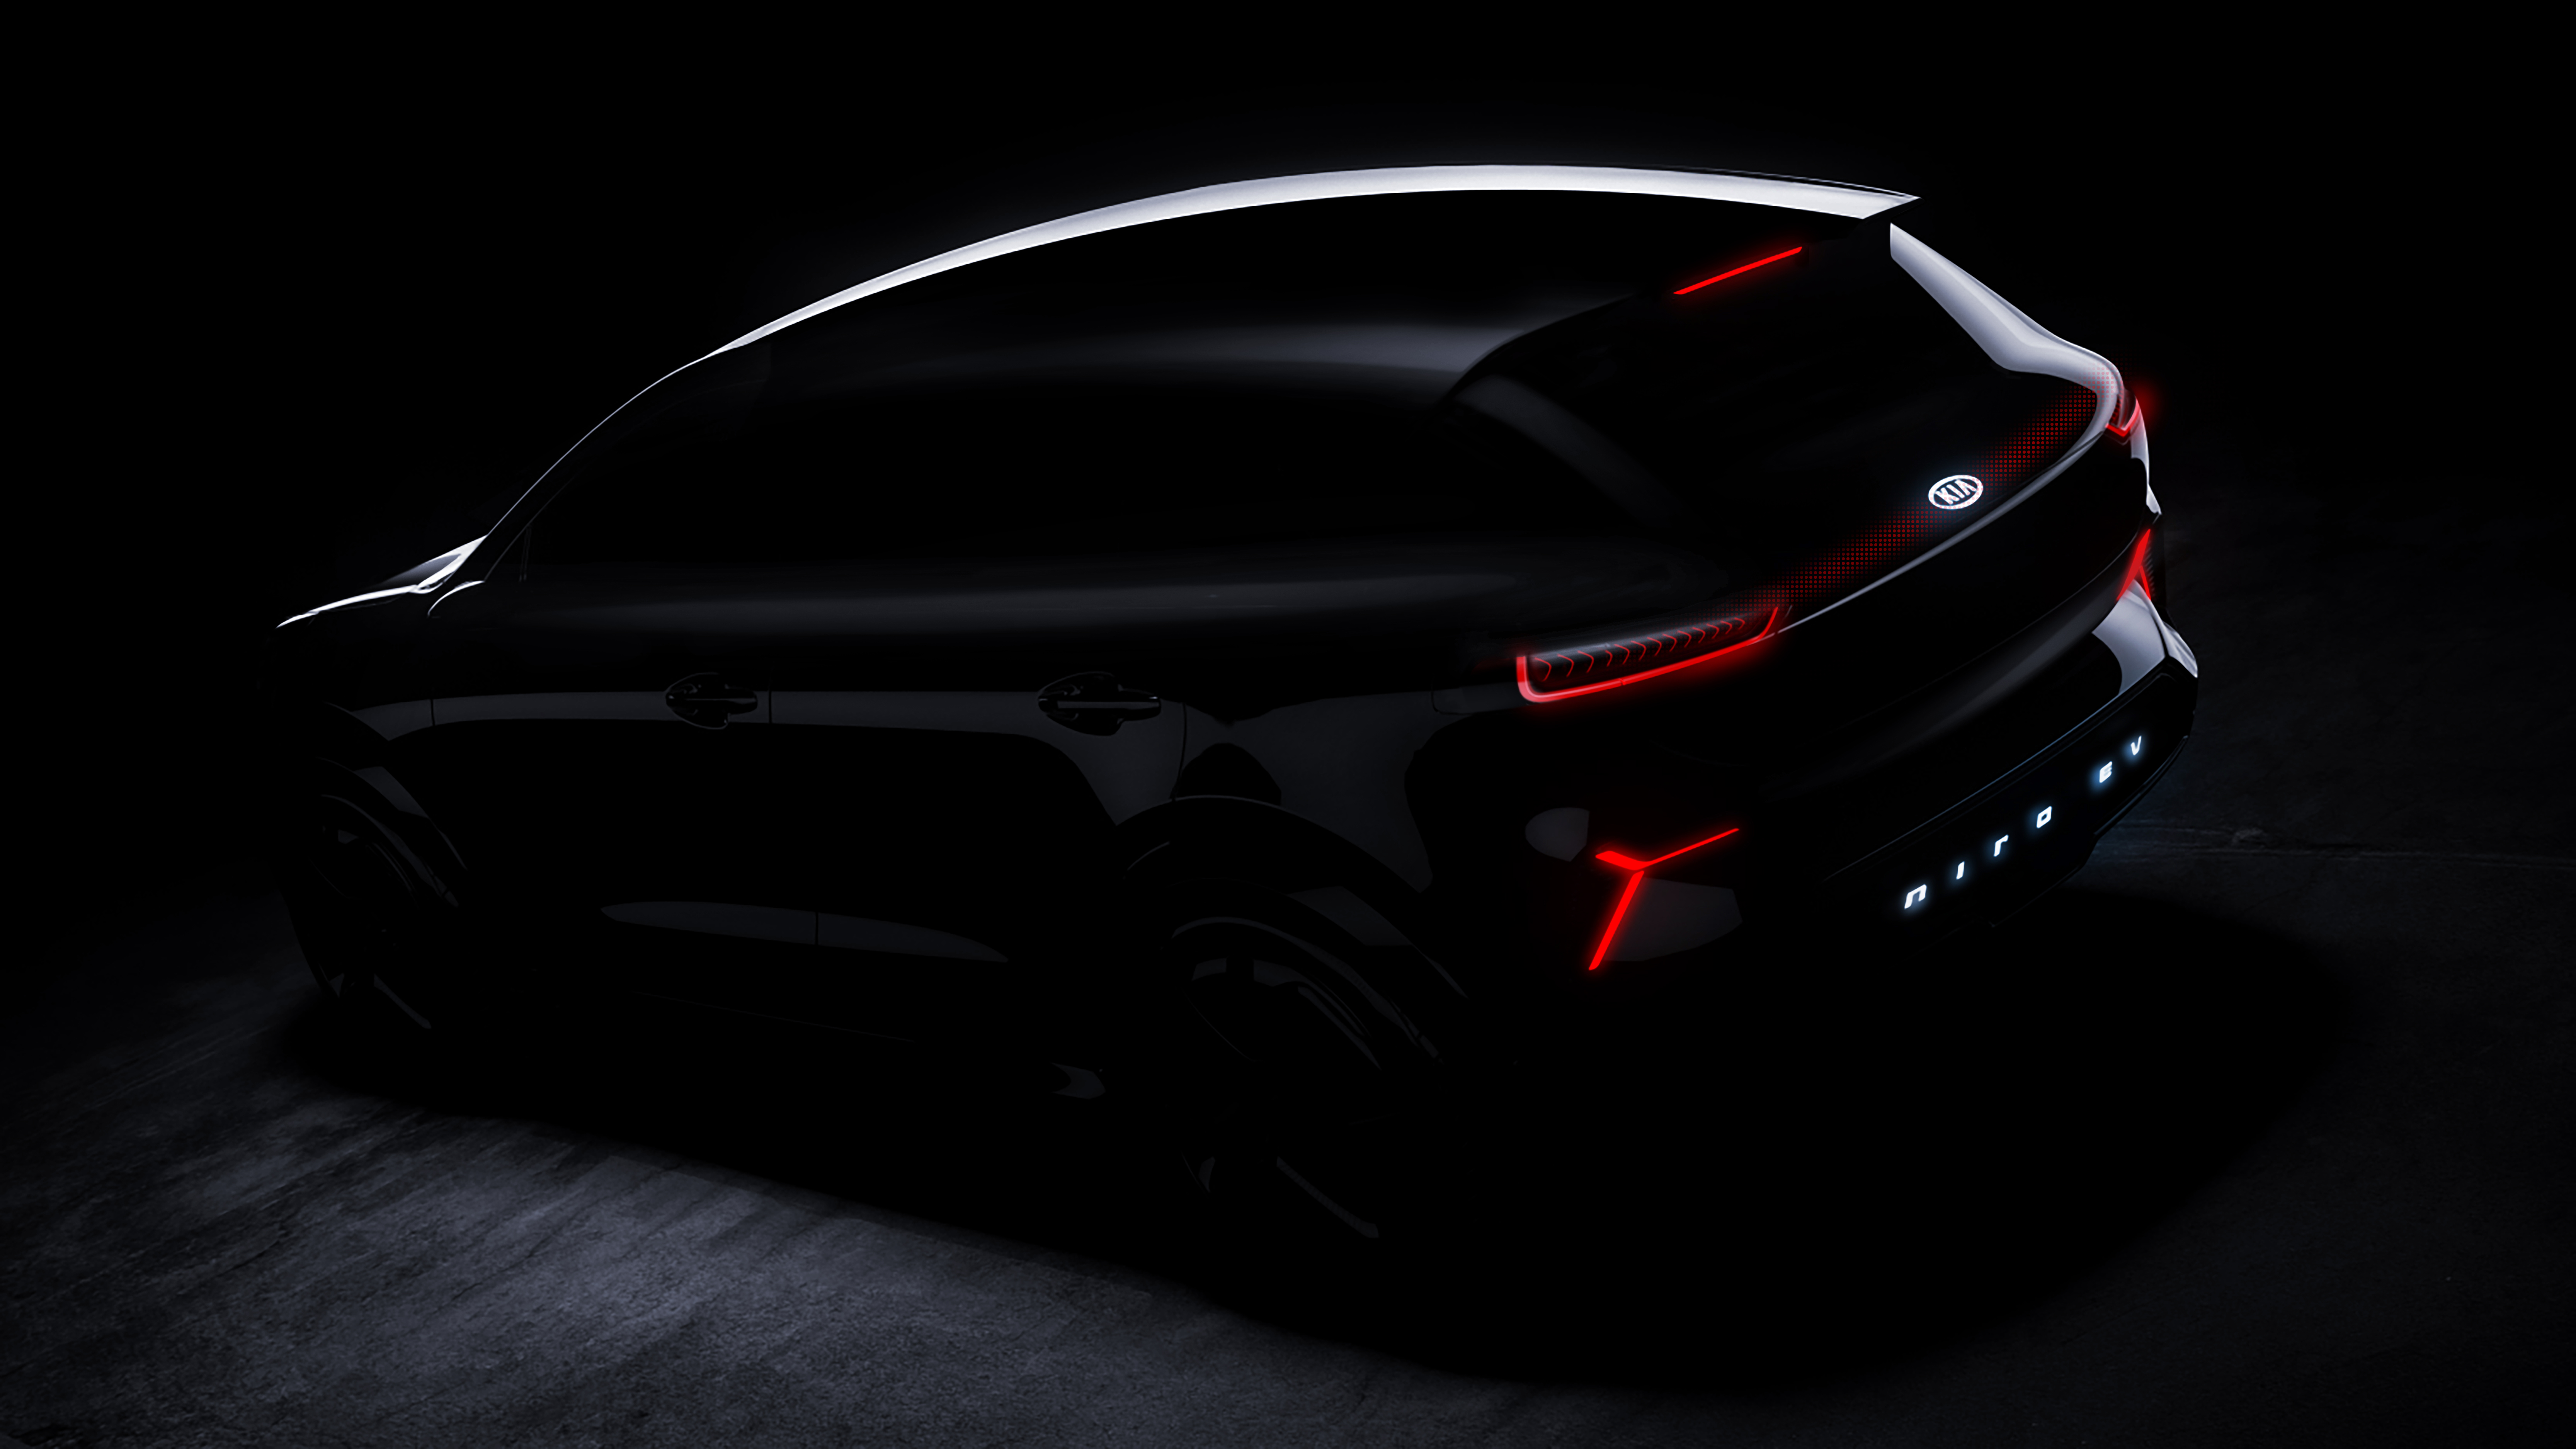 Kia to reveal all-electric concept car at CES 2018